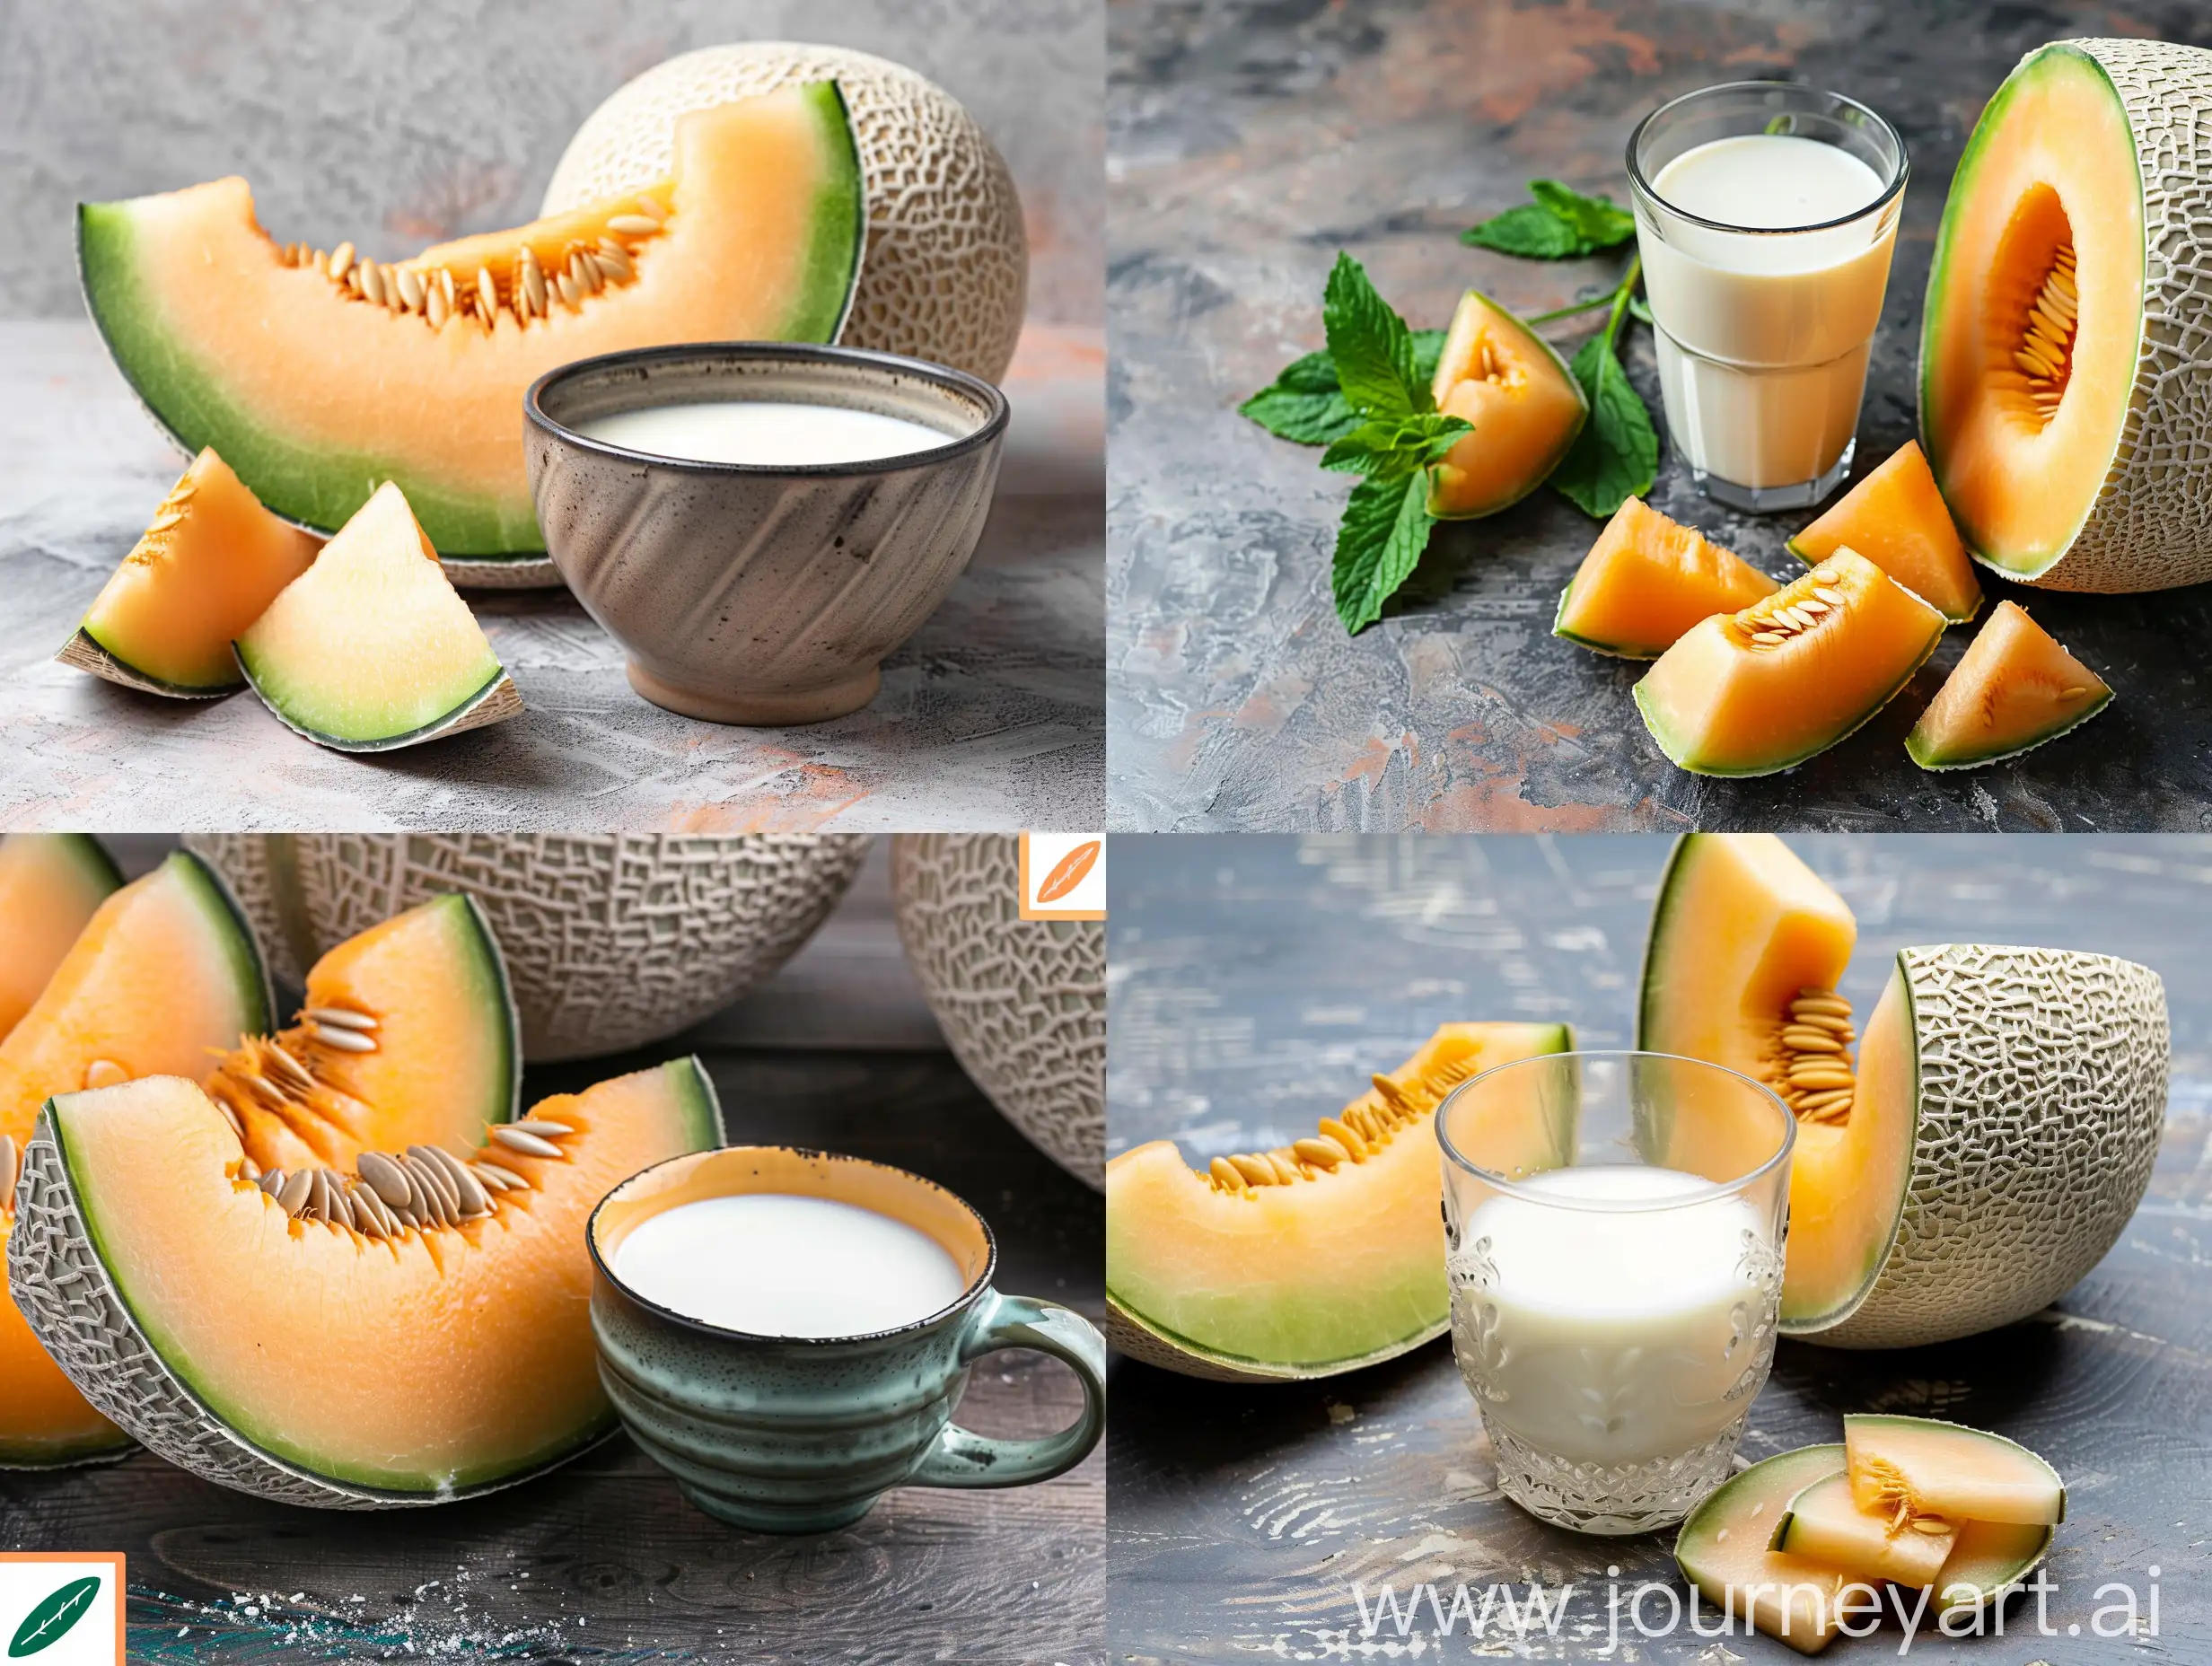 Attractive advertisement photo of cantaloupe with milk